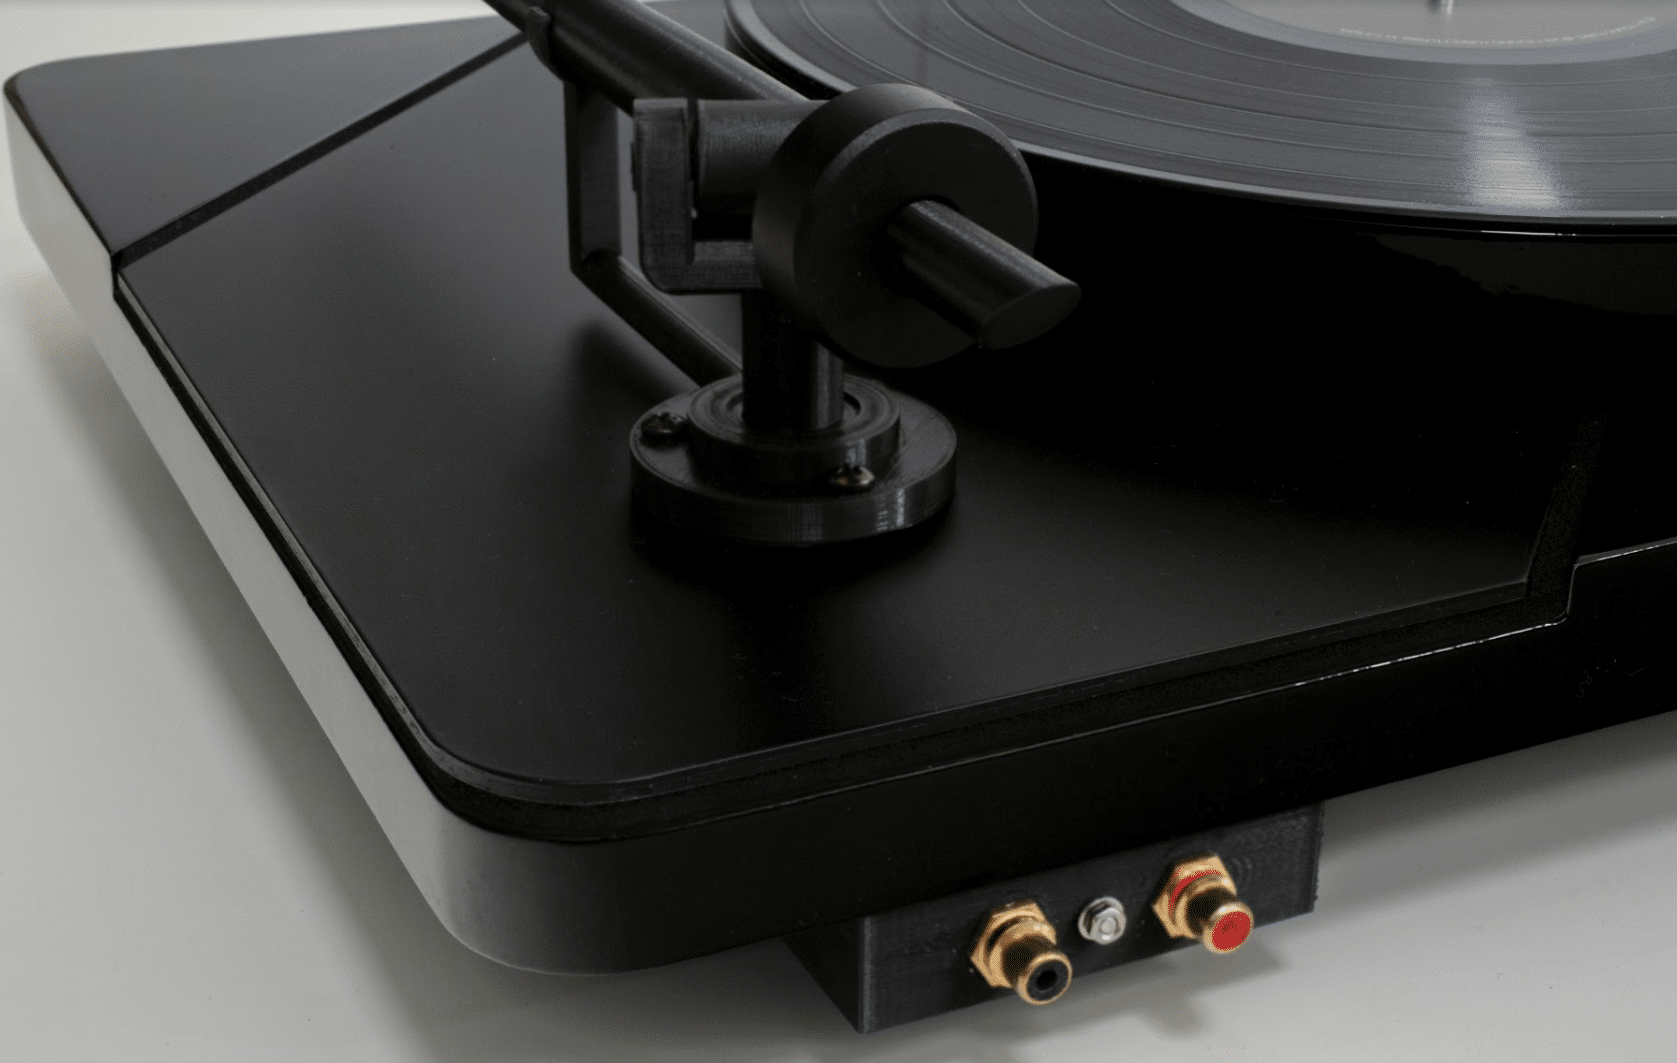 Logigram manual turntable: Crowdfunded